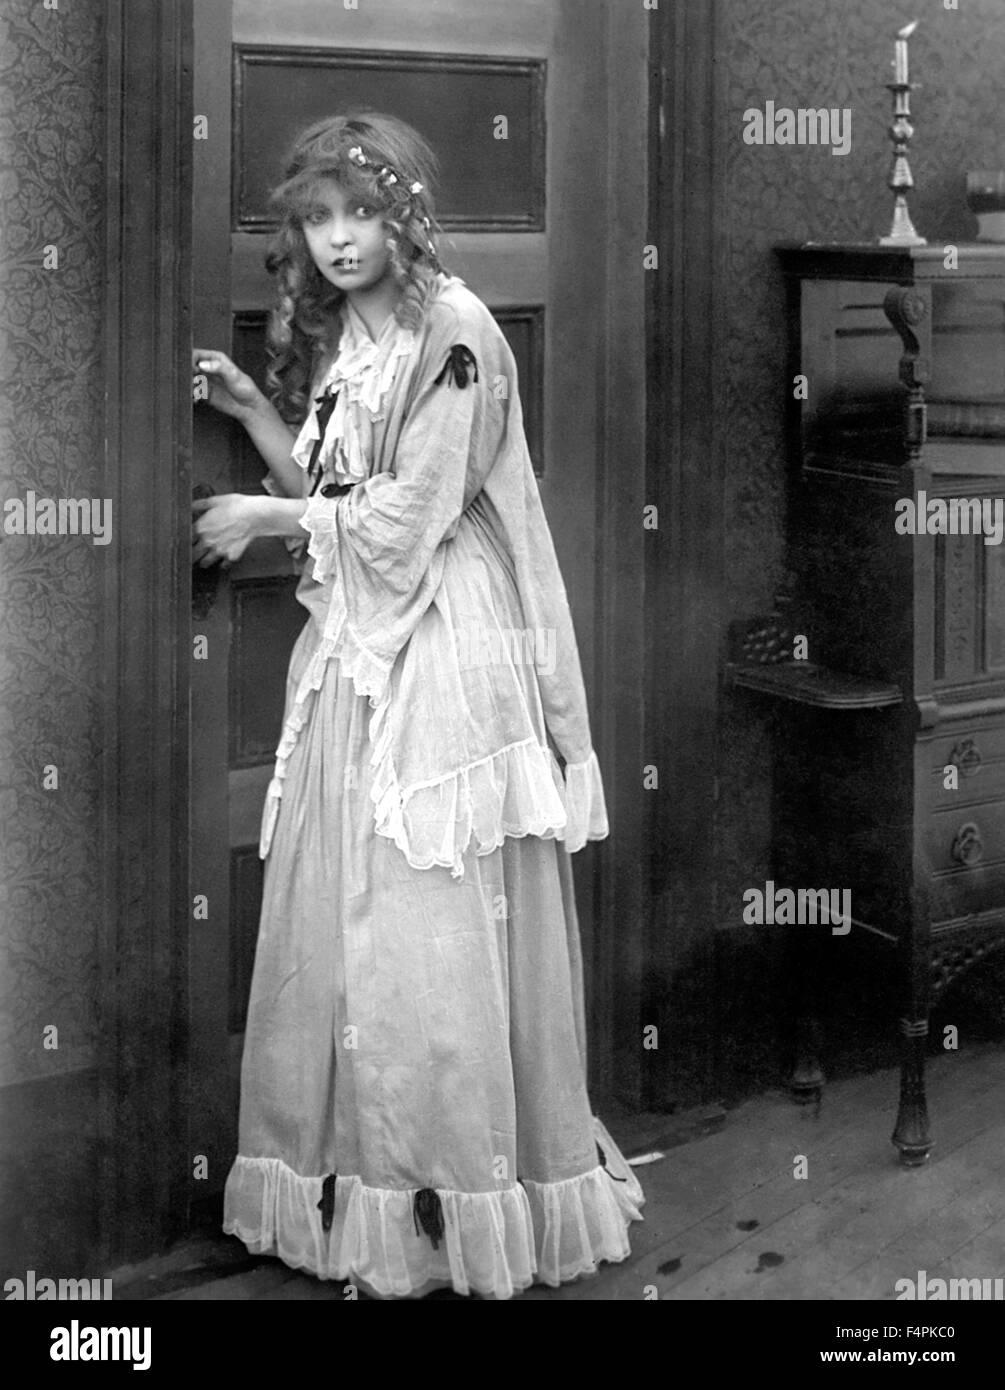 Lillian Gish / The Birth of a Nation / 1915 directed by D.W. Griffith [Epoch Producing Corporation] Stock Photo